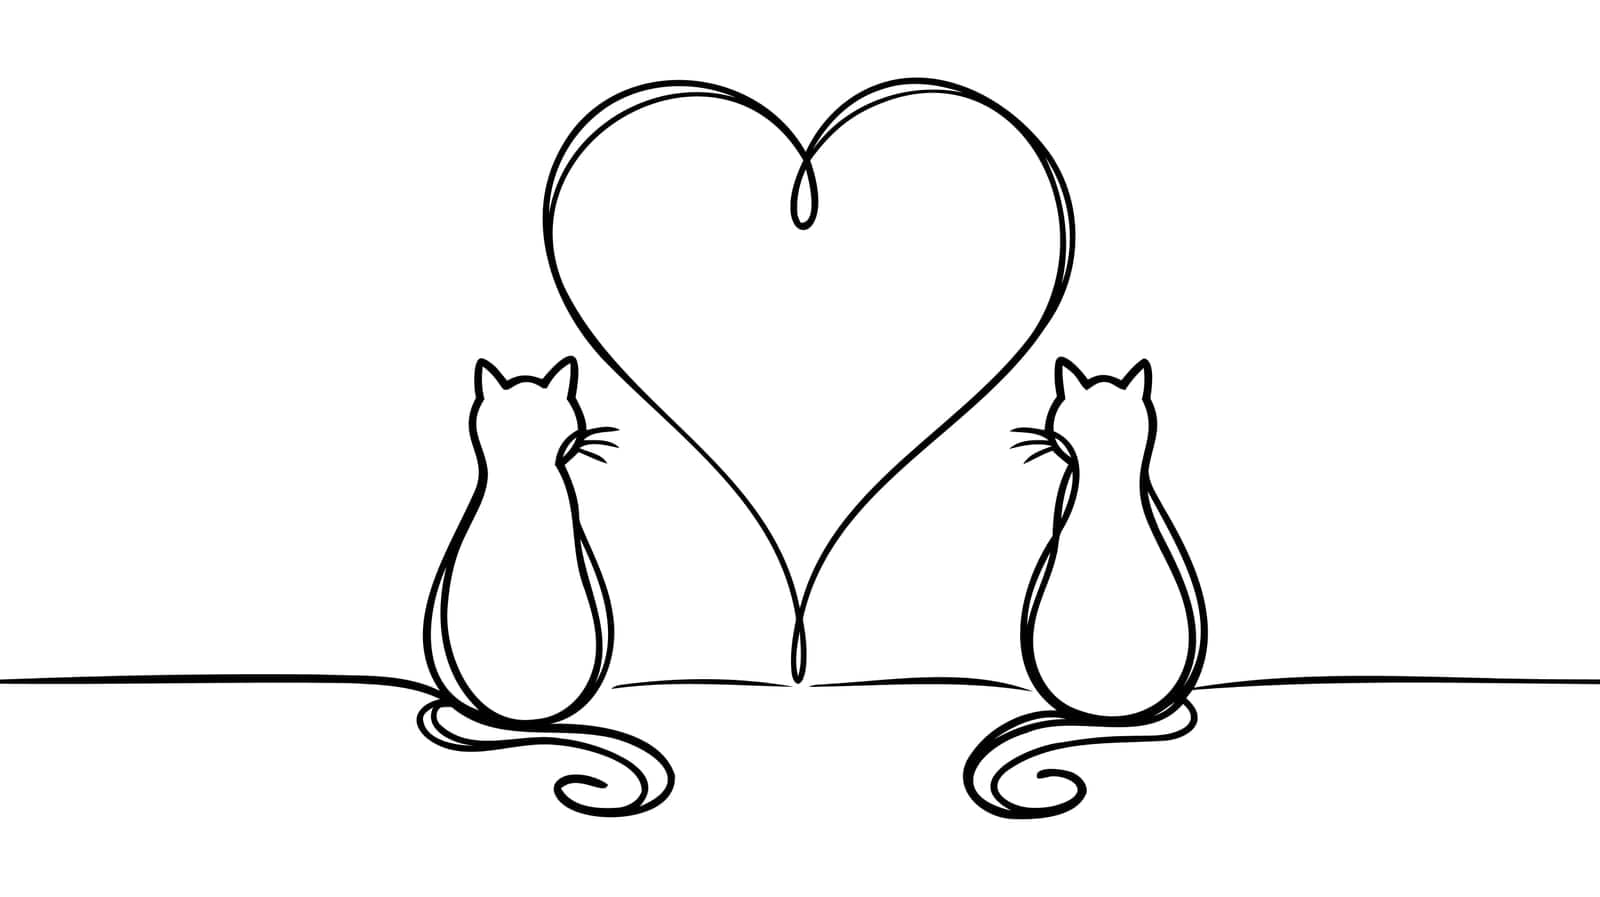 One line continuous cats and heart symbol. Line art love banner concept. Hand drawn, outline vector illustration by Artisttop